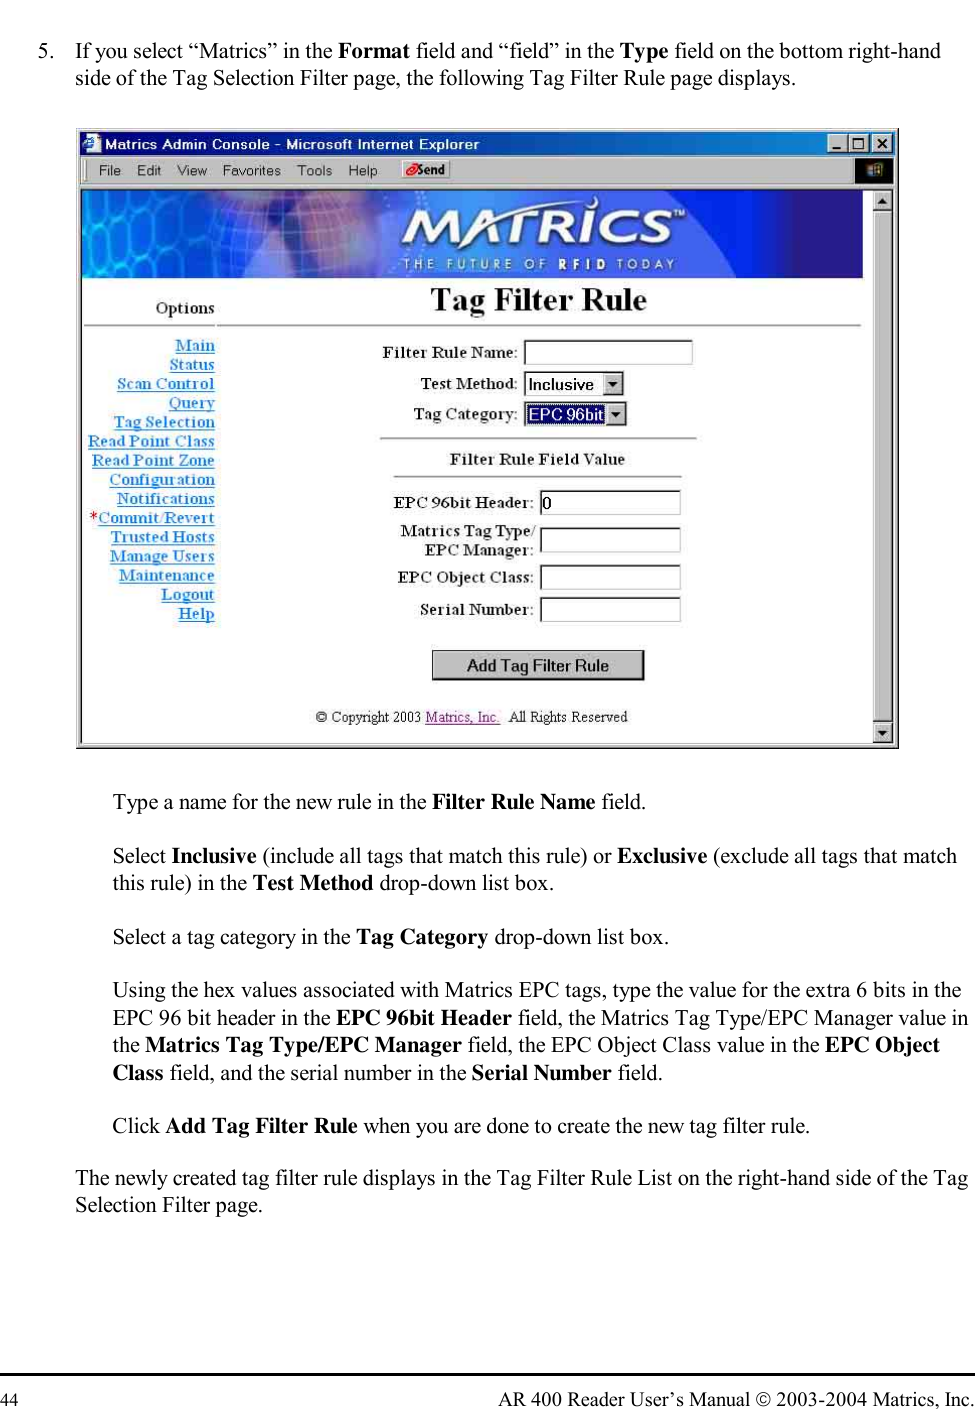  44  AR 400 Reader User’s Manual  2003-2004 Matrics, Inc. 5.  If you select “Matrics” in the Format field and “field” in the Type field on the bottom right-hand side of the Tag Selection Filter page, the following Tag Filter Rule page displays.    Type a name for the new rule in the Filter Rule Name field.   Select Inclusive (include all tags that match this rule) or Exclusive (exclude all tags that match this rule) in the Test Method drop-down list box.    Select a tag category in the Tag Category drop-down list box.    Using the hex values associated with Matrics EPC tags, type the value for the extra 6 bits in the EPC 96 bit header in the EPC 96bit Header field, the Matrics Tag Type/EPC Manager value in the Matrics Tag Type/EPC Manager field, the EPC Object Class value in the EPC Object Class field, and the serial number in the Serial Number field.   Click Add Tag Filter Rule when you are done to create the new tag filter rule. The newly created tag filter rule displays in the Tag Filter Rule List on the right-hand side of the Tag Selection Filter page. 